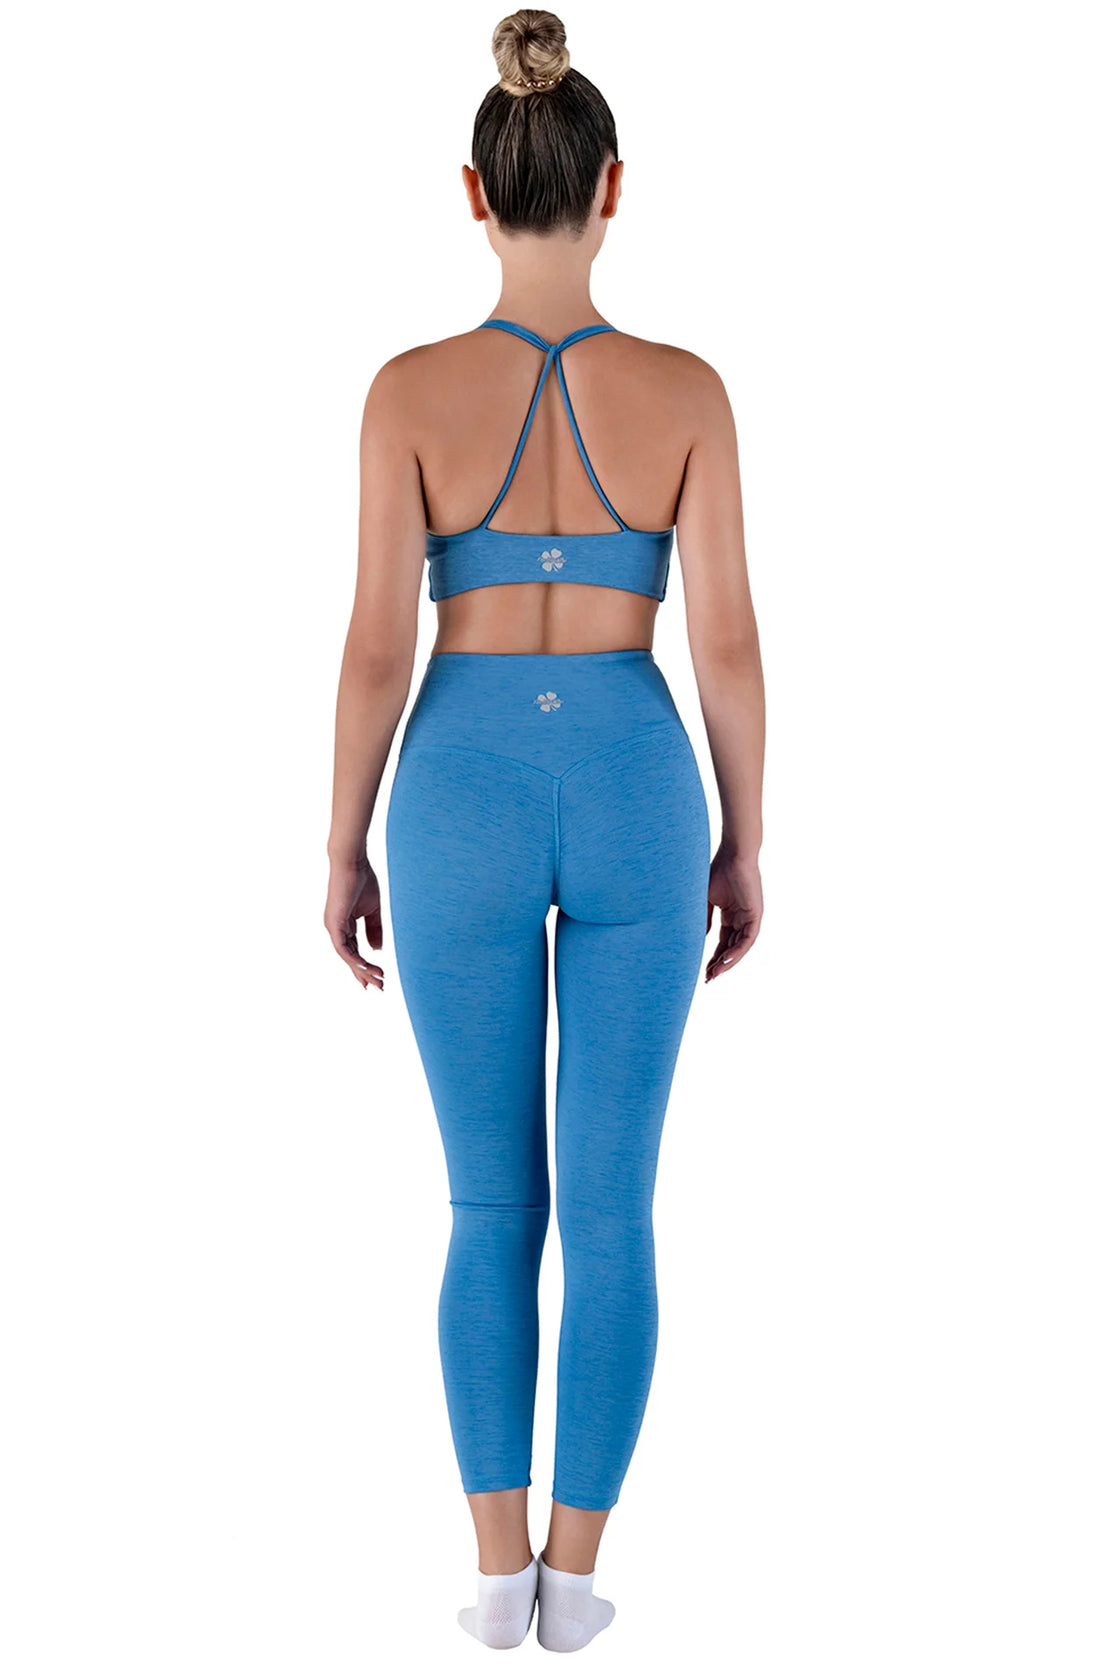 Leggings set with bra in blue color from back